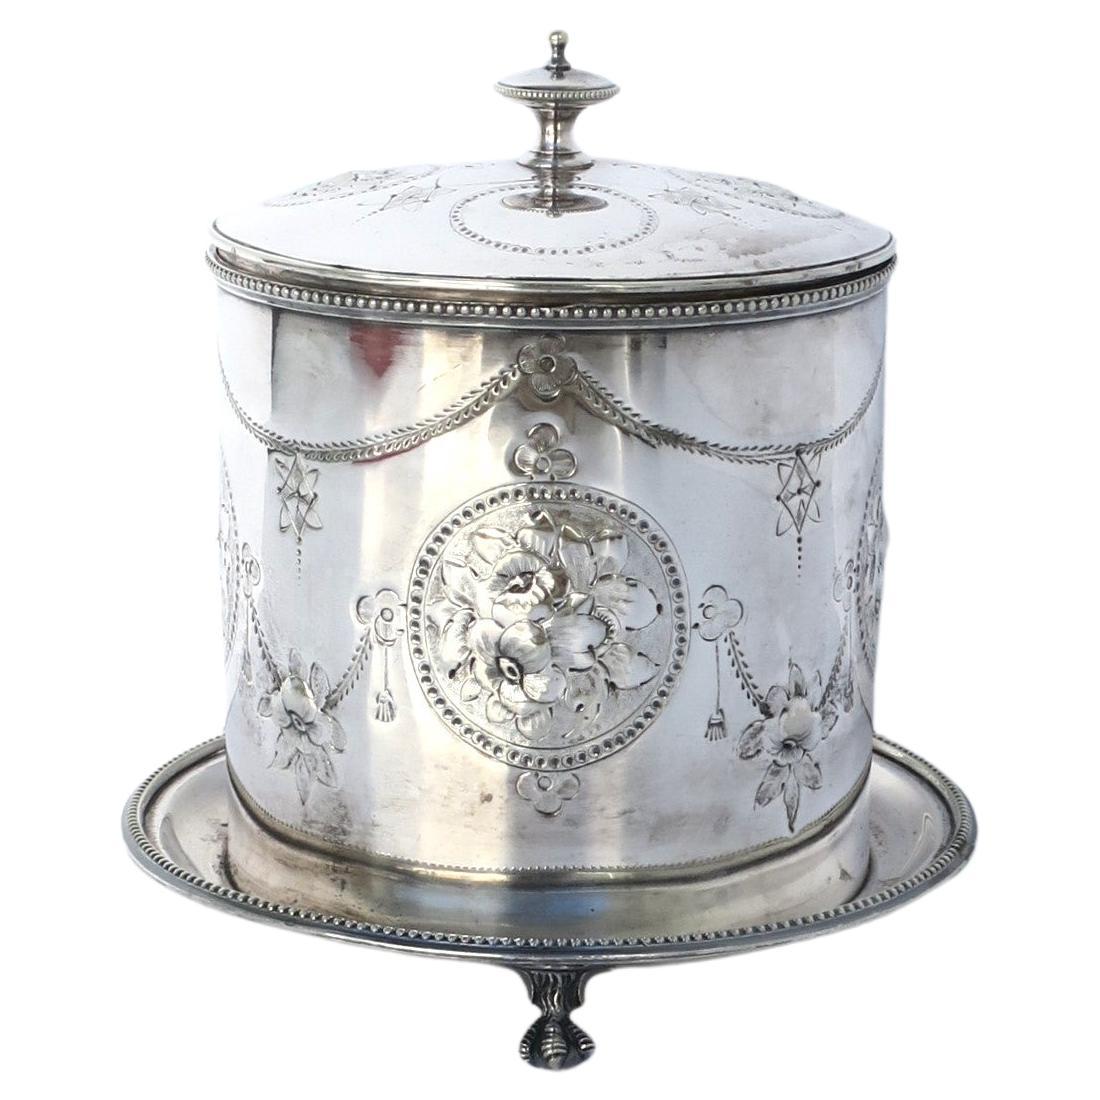 English Silver Plate Covered Biscuit Box or Tea Caddy For Sale